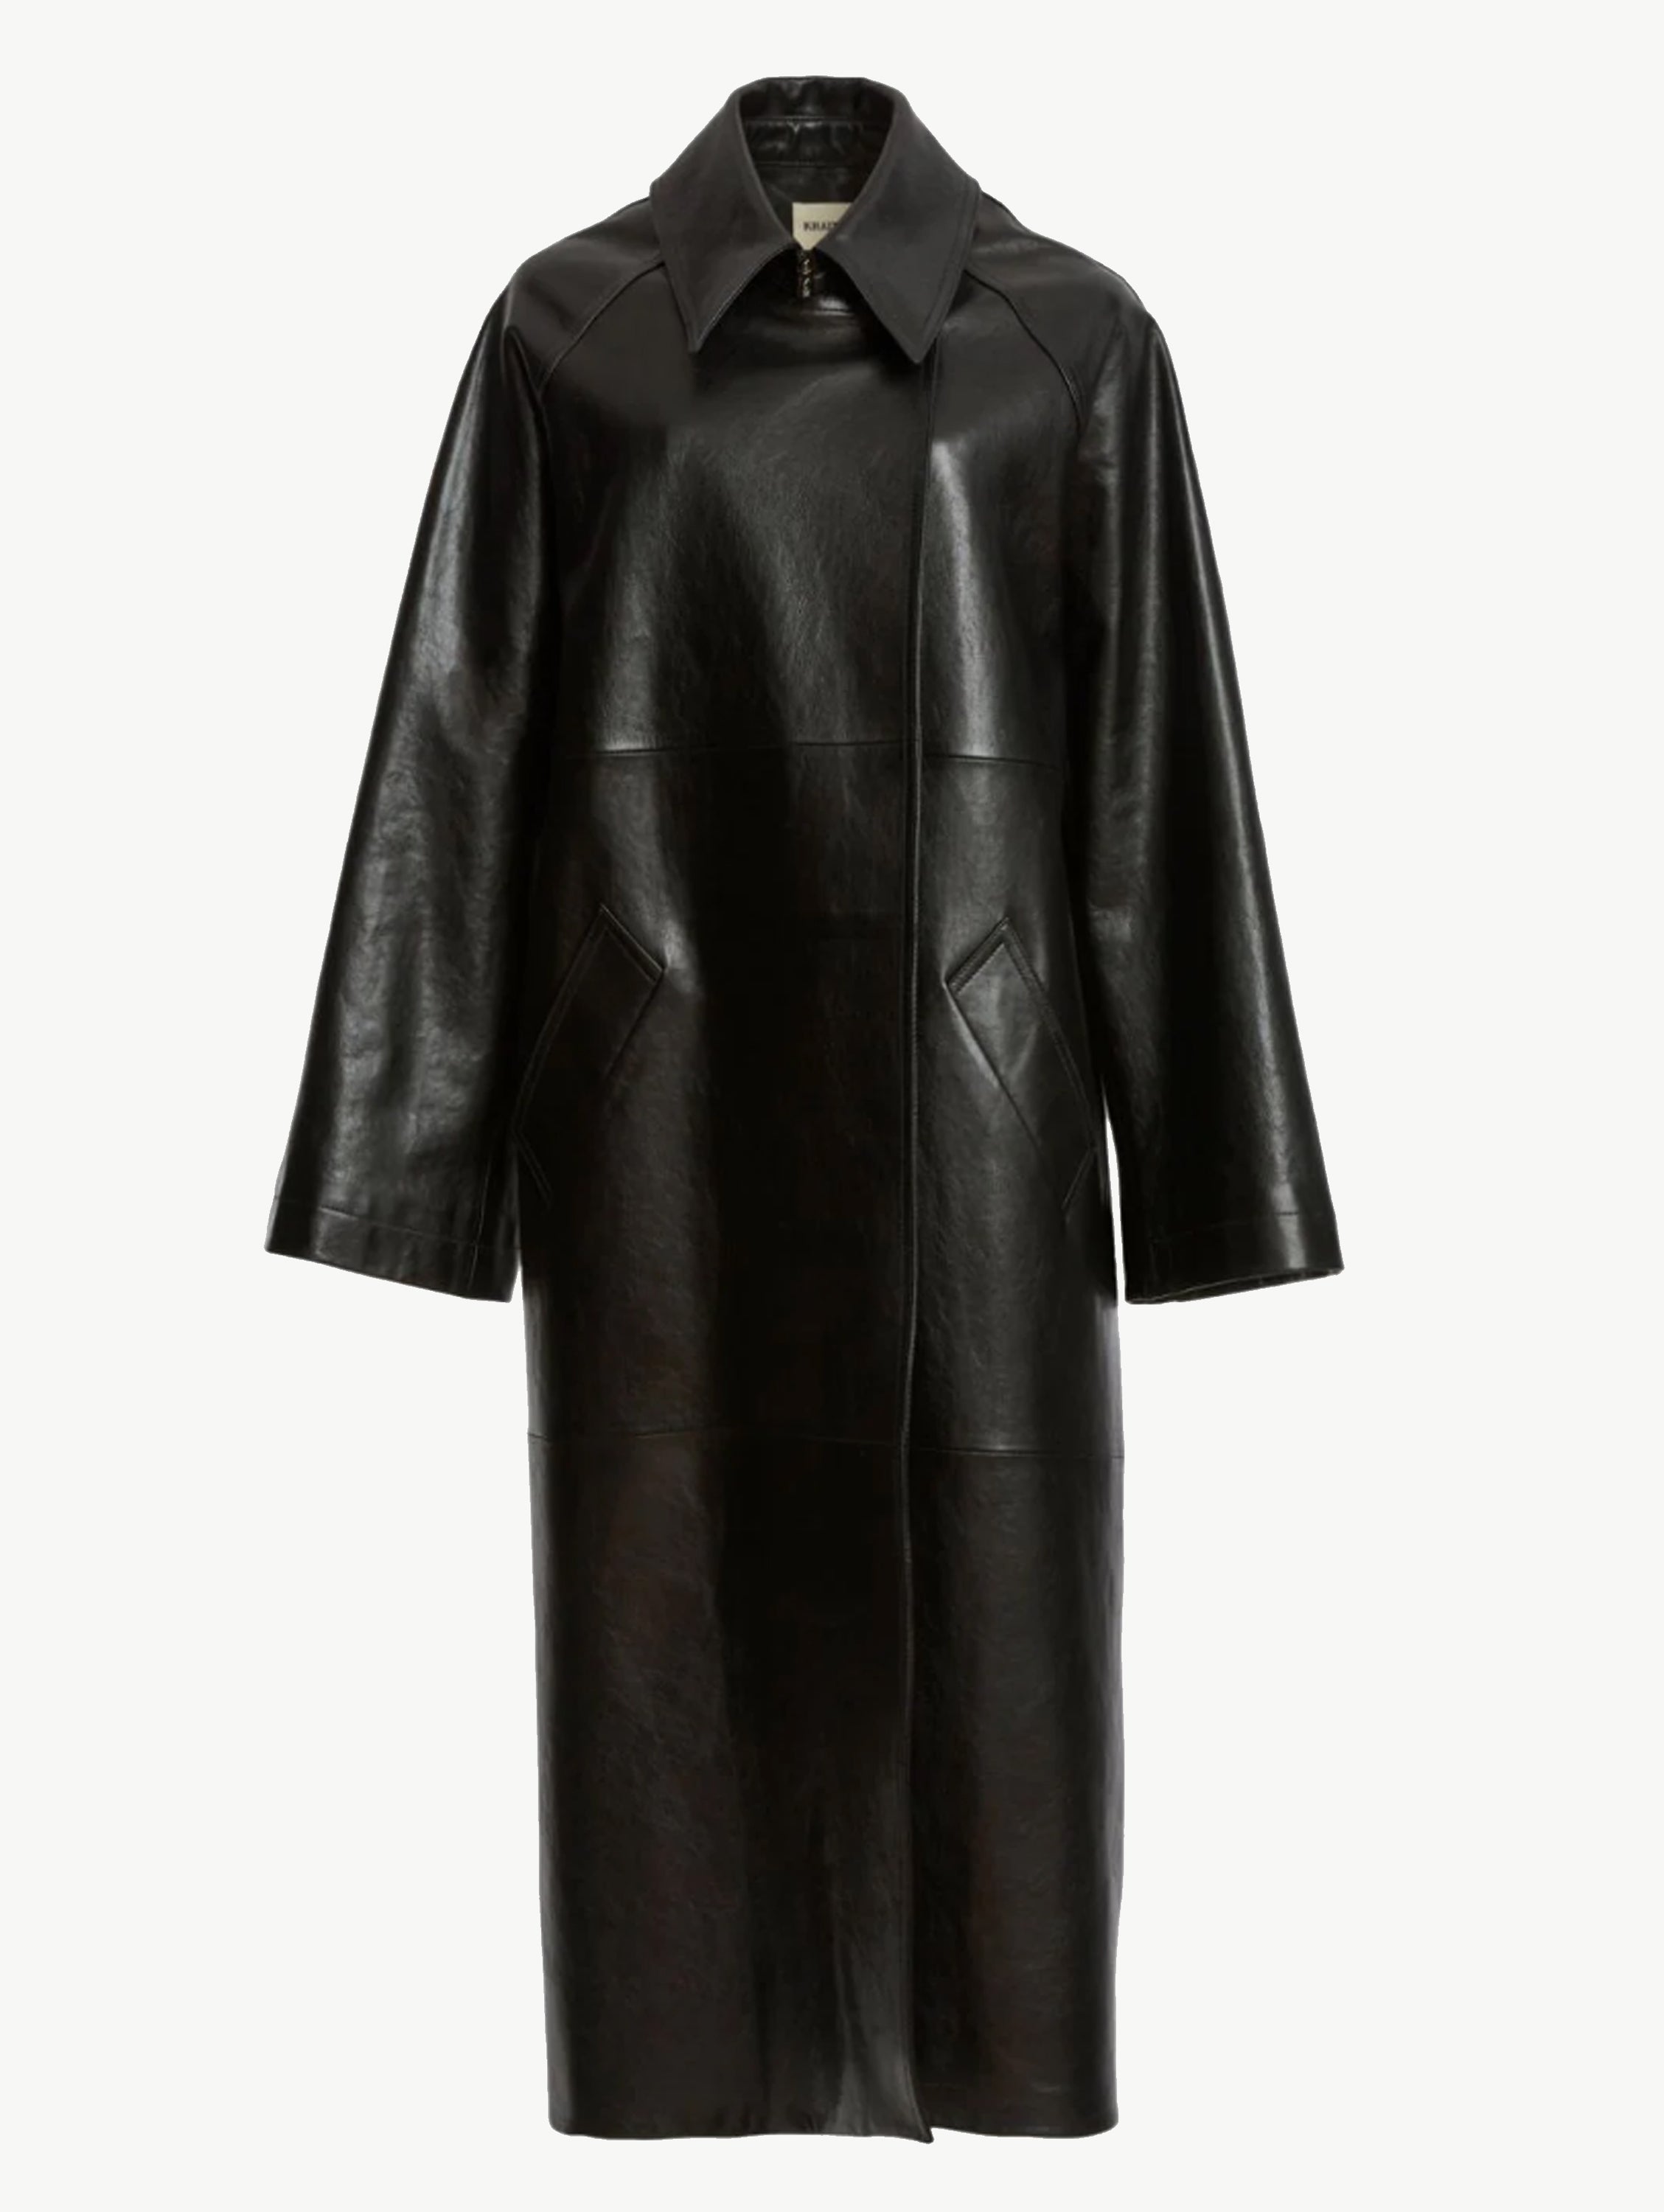 The Minnie leather coat